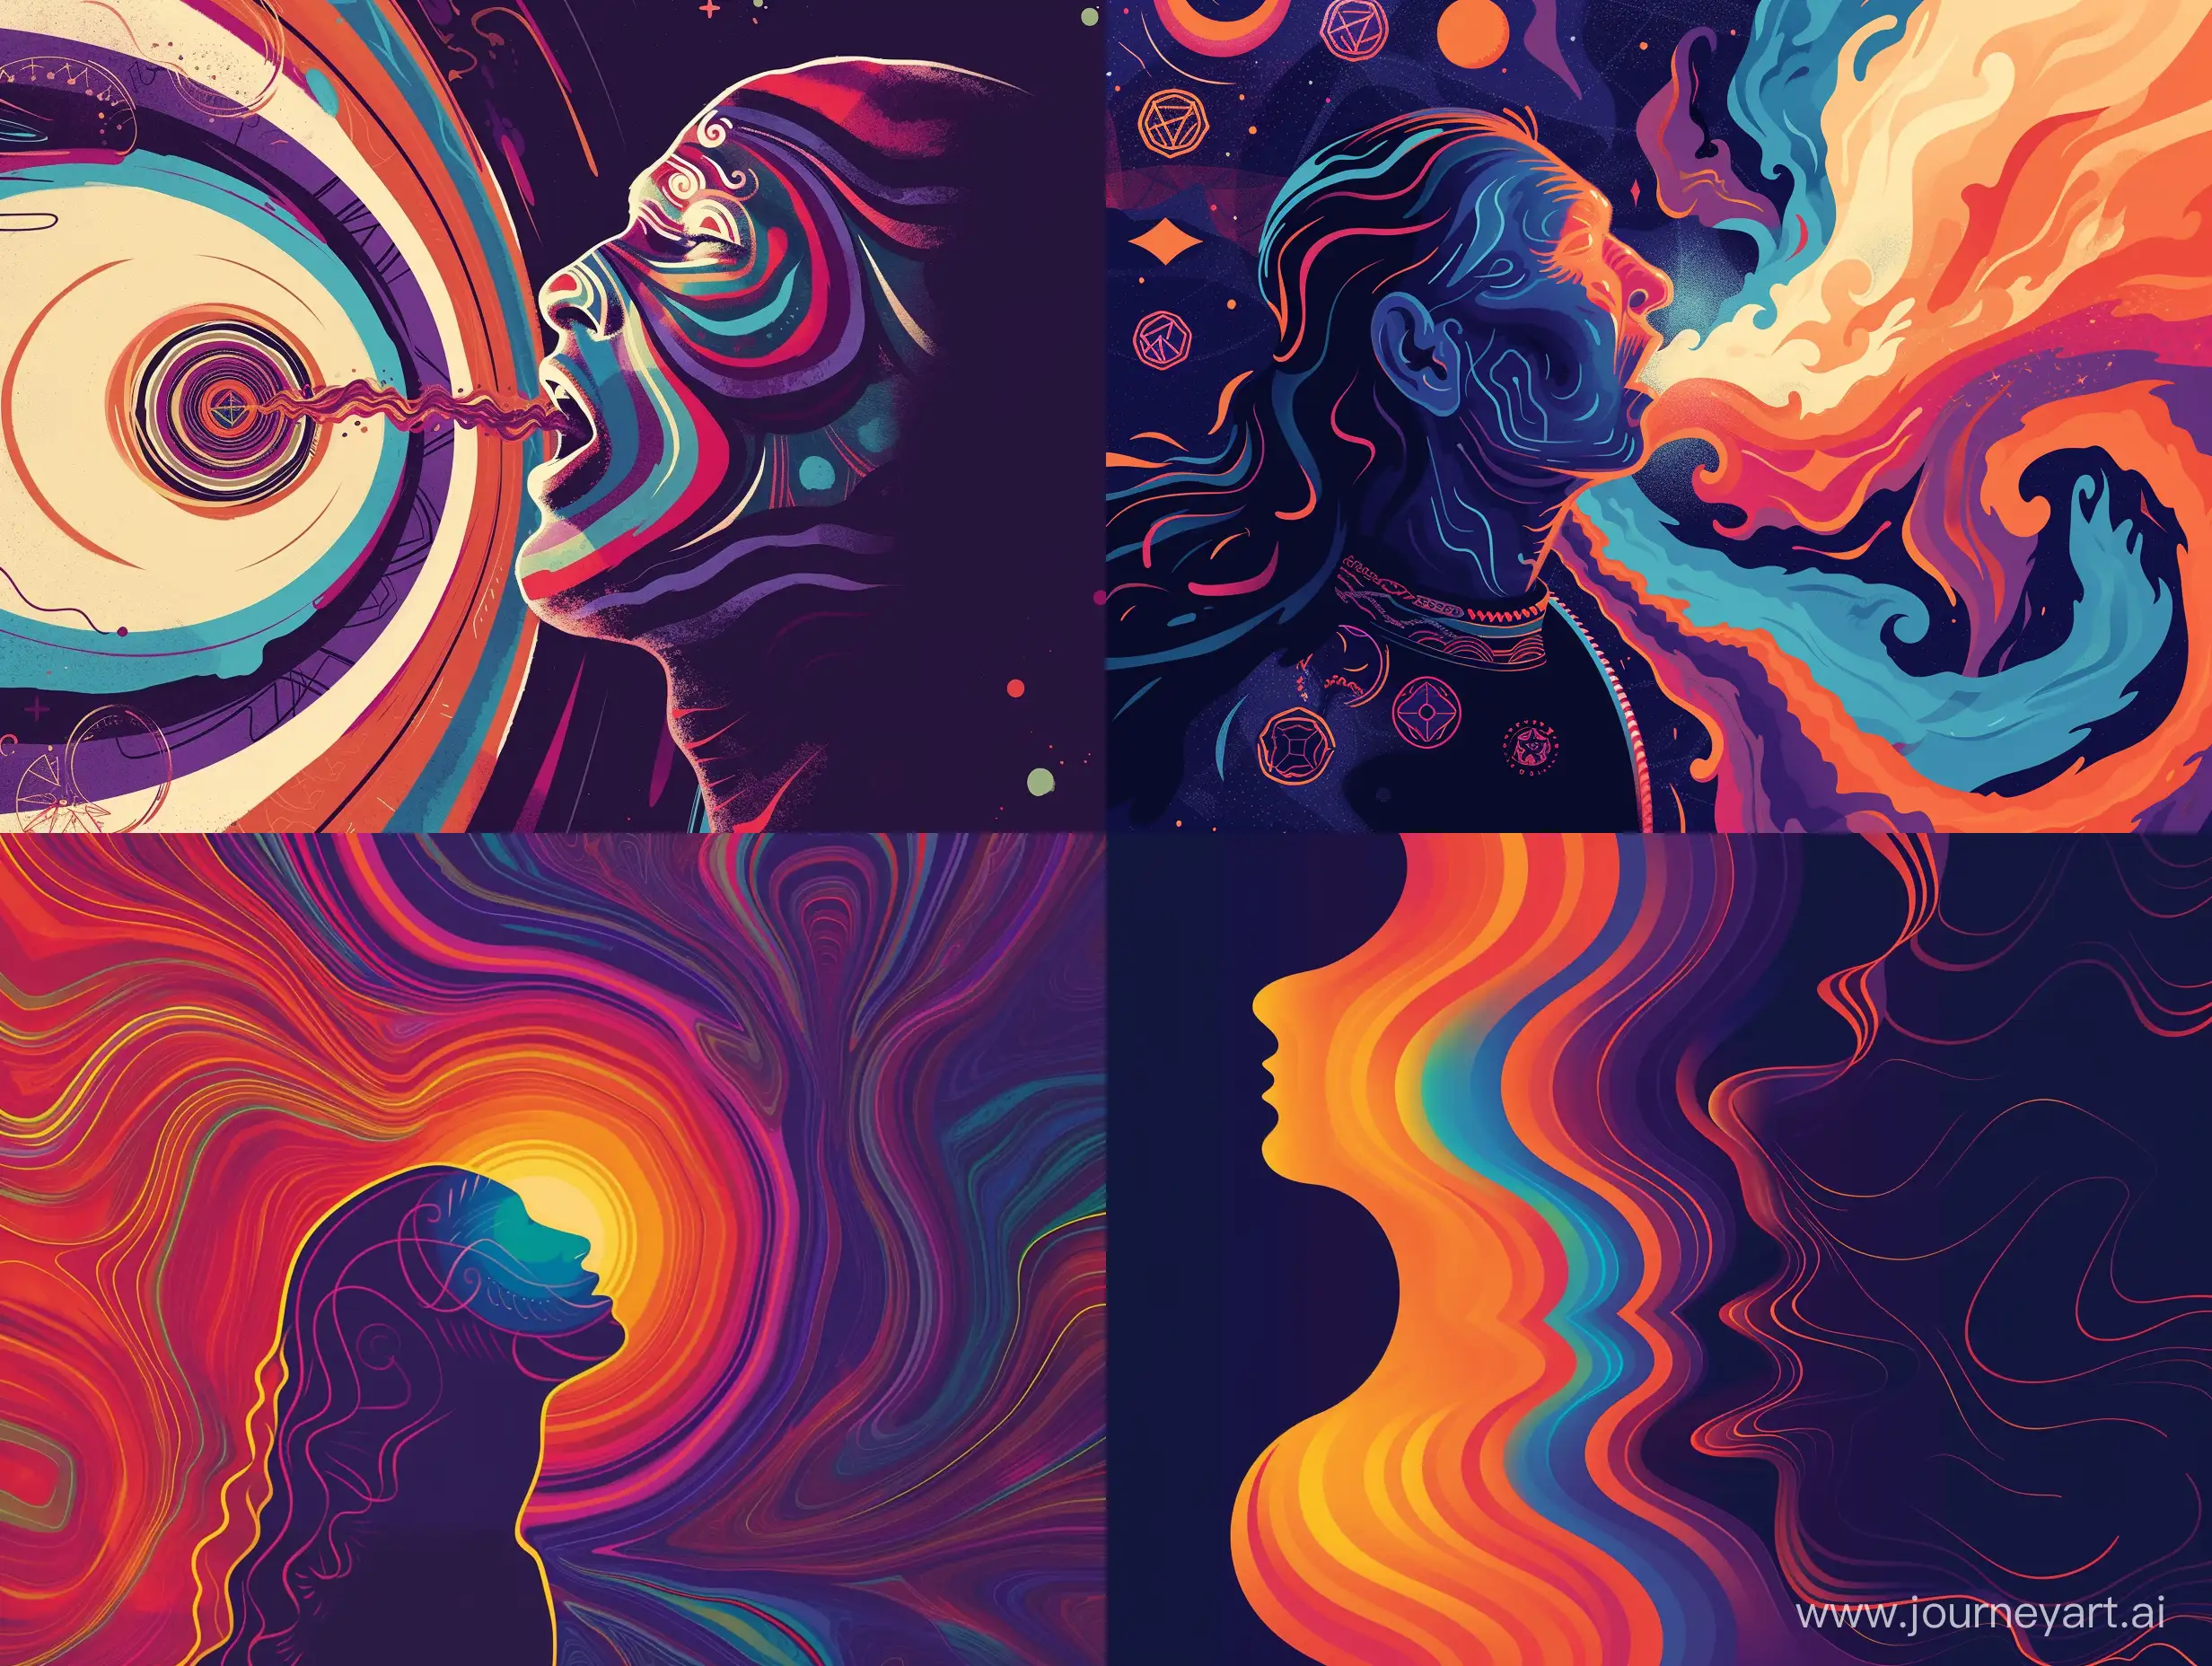 Create a minimalistic album cover that captures the essence of a modern shaman's journey through psychedelic voice effects. The cover should evoke a sense of mystical exploration, blending ancient shamanic traditions with contemporary musical experimentation.  Consider using vibrant, swirling colors to represent the kaleidoscopic experience of altered consciousness. Incorporate symbolic imagery such as sacred geometries, tribal motifs, or psychedelic patterns to convey the merging of traditional wisdom with cutting-edge technology.  Keep the design clean and simple, focusing on the central theme of the voice as a tool for transcendent expression. Experiment with abstract shapes and textures to evoke a sense of sonic experimentation and spiritual awakening.  Ultimately, the album cover should intrigue viewers and invite them to embark on a sonic journey through the realms of consciousness guided by the transformative power of modern shamanic music.